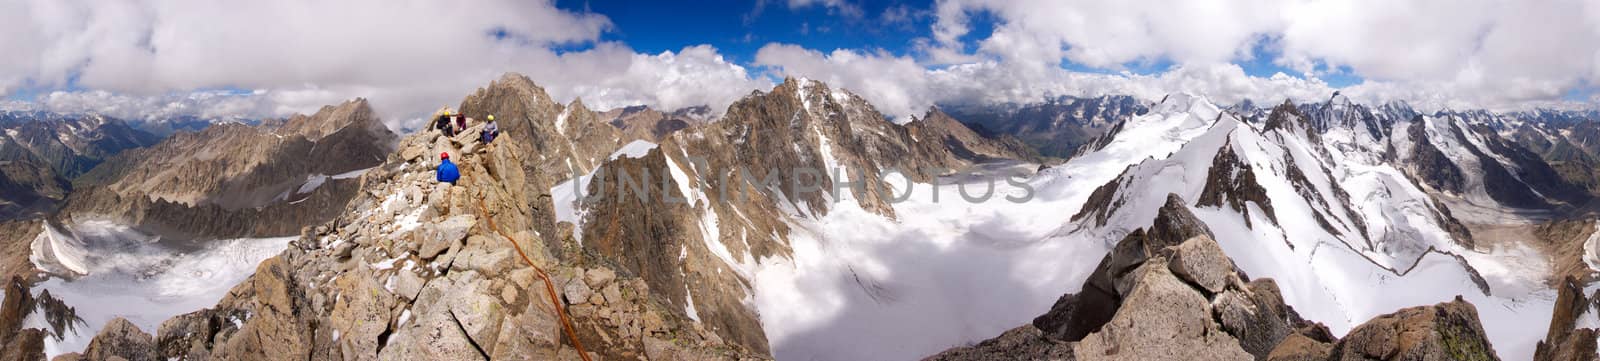 Panorama of Caucasian mountains with climbers at the top - 360 by saasemen